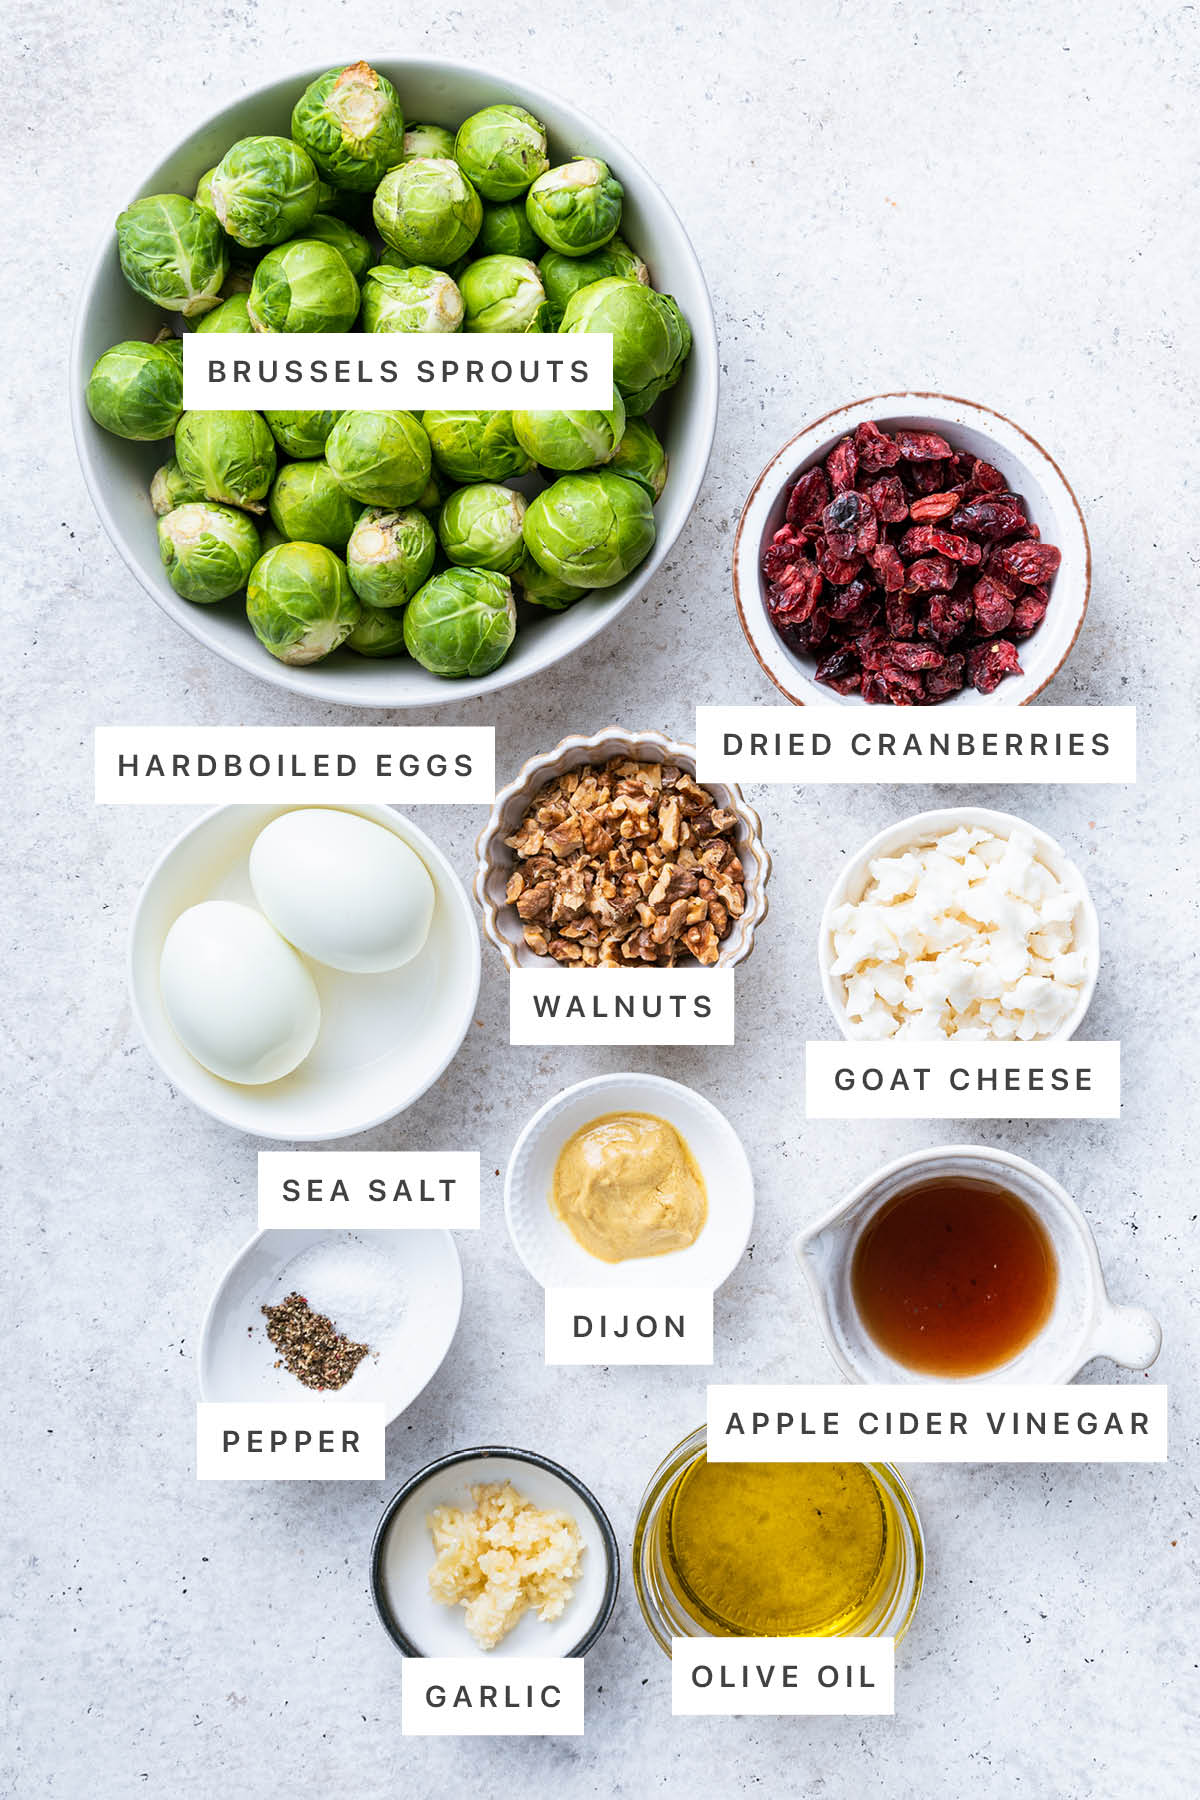 Ingredients measured out to make Brussels Sprout Chopped Salad: brussels sprouts, dried cranberries, hardboiled eggs, walnuts, goat cheese, sea salt, pepper, dijon, apple cider vinegar, garlic and olive oil.